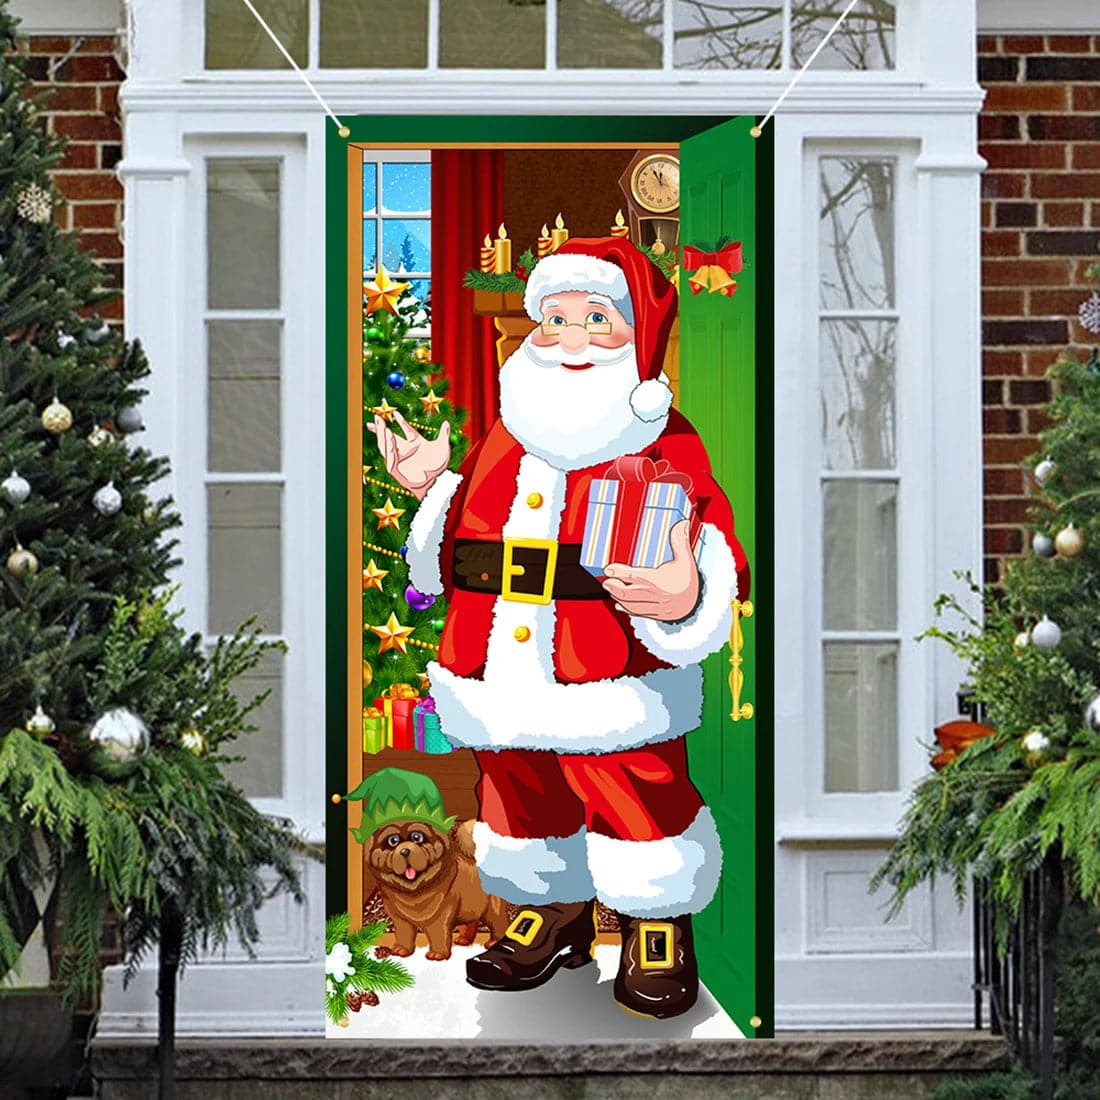 Christmas Backdrop Banner Christmas Elves Door Cover For Party House Door Nightmare Before Christmas Outdoor Decorations Props